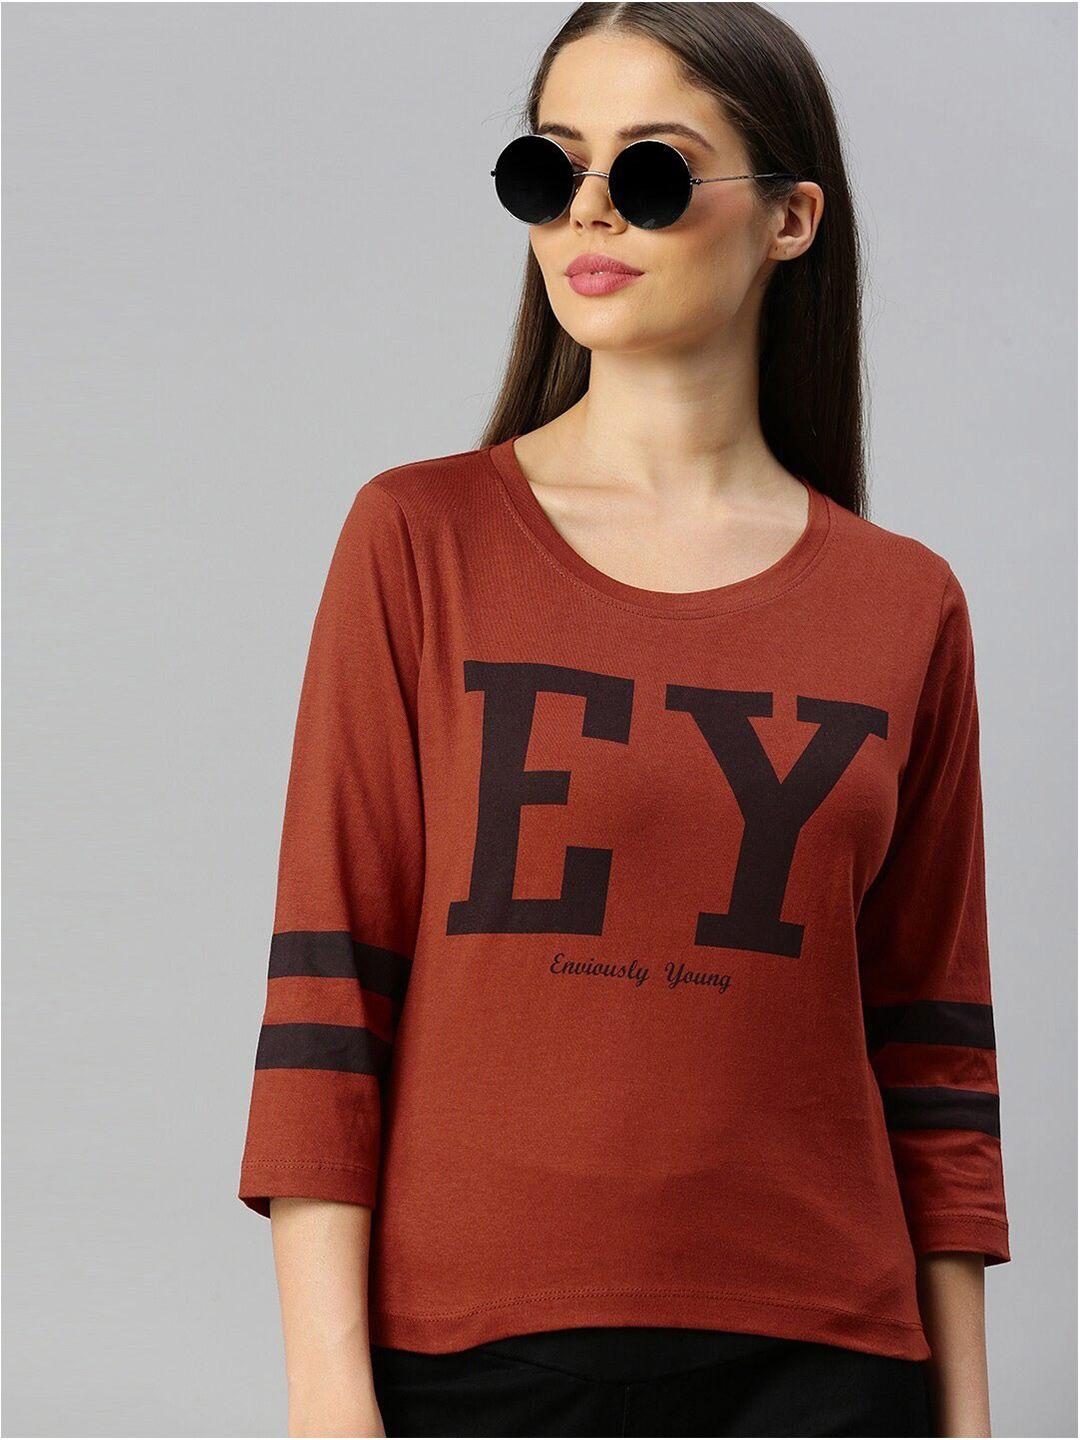 enviously young typography printed cotton t-shirt